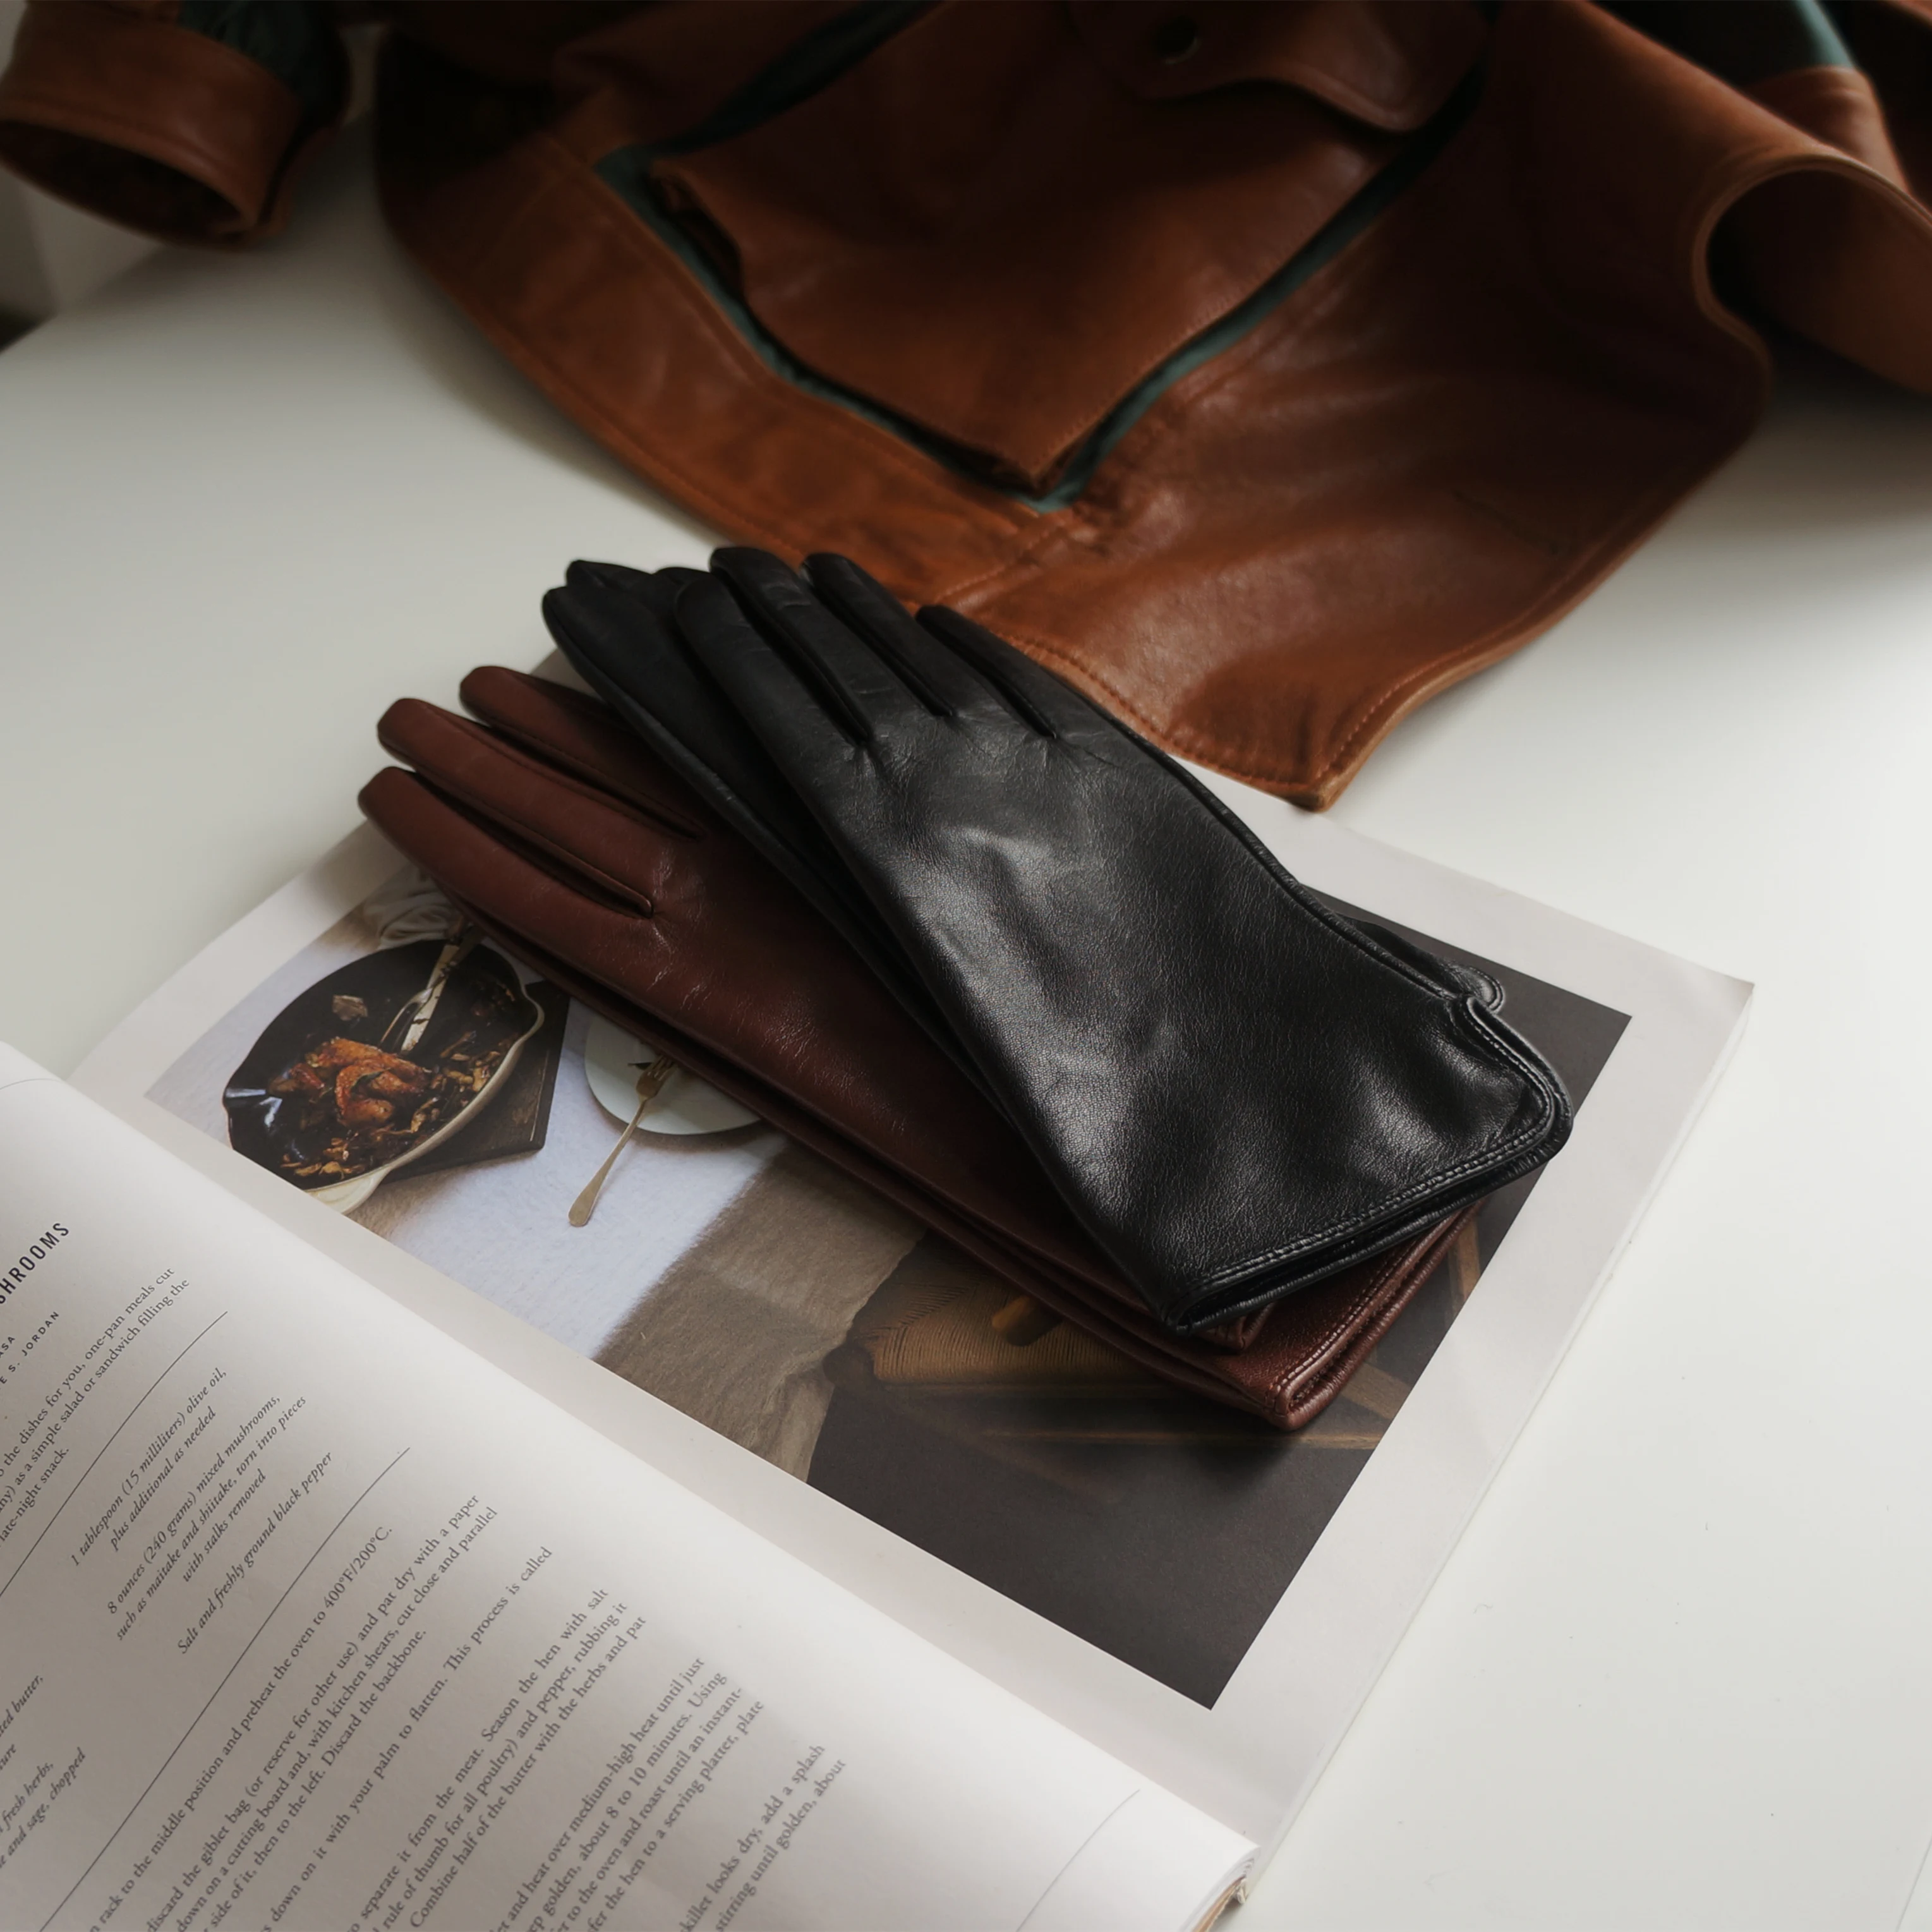 The first pair of leather gloves * autumn and winter minimalist sheepskin gloves thin hand repair leather gloves slim soft waxy